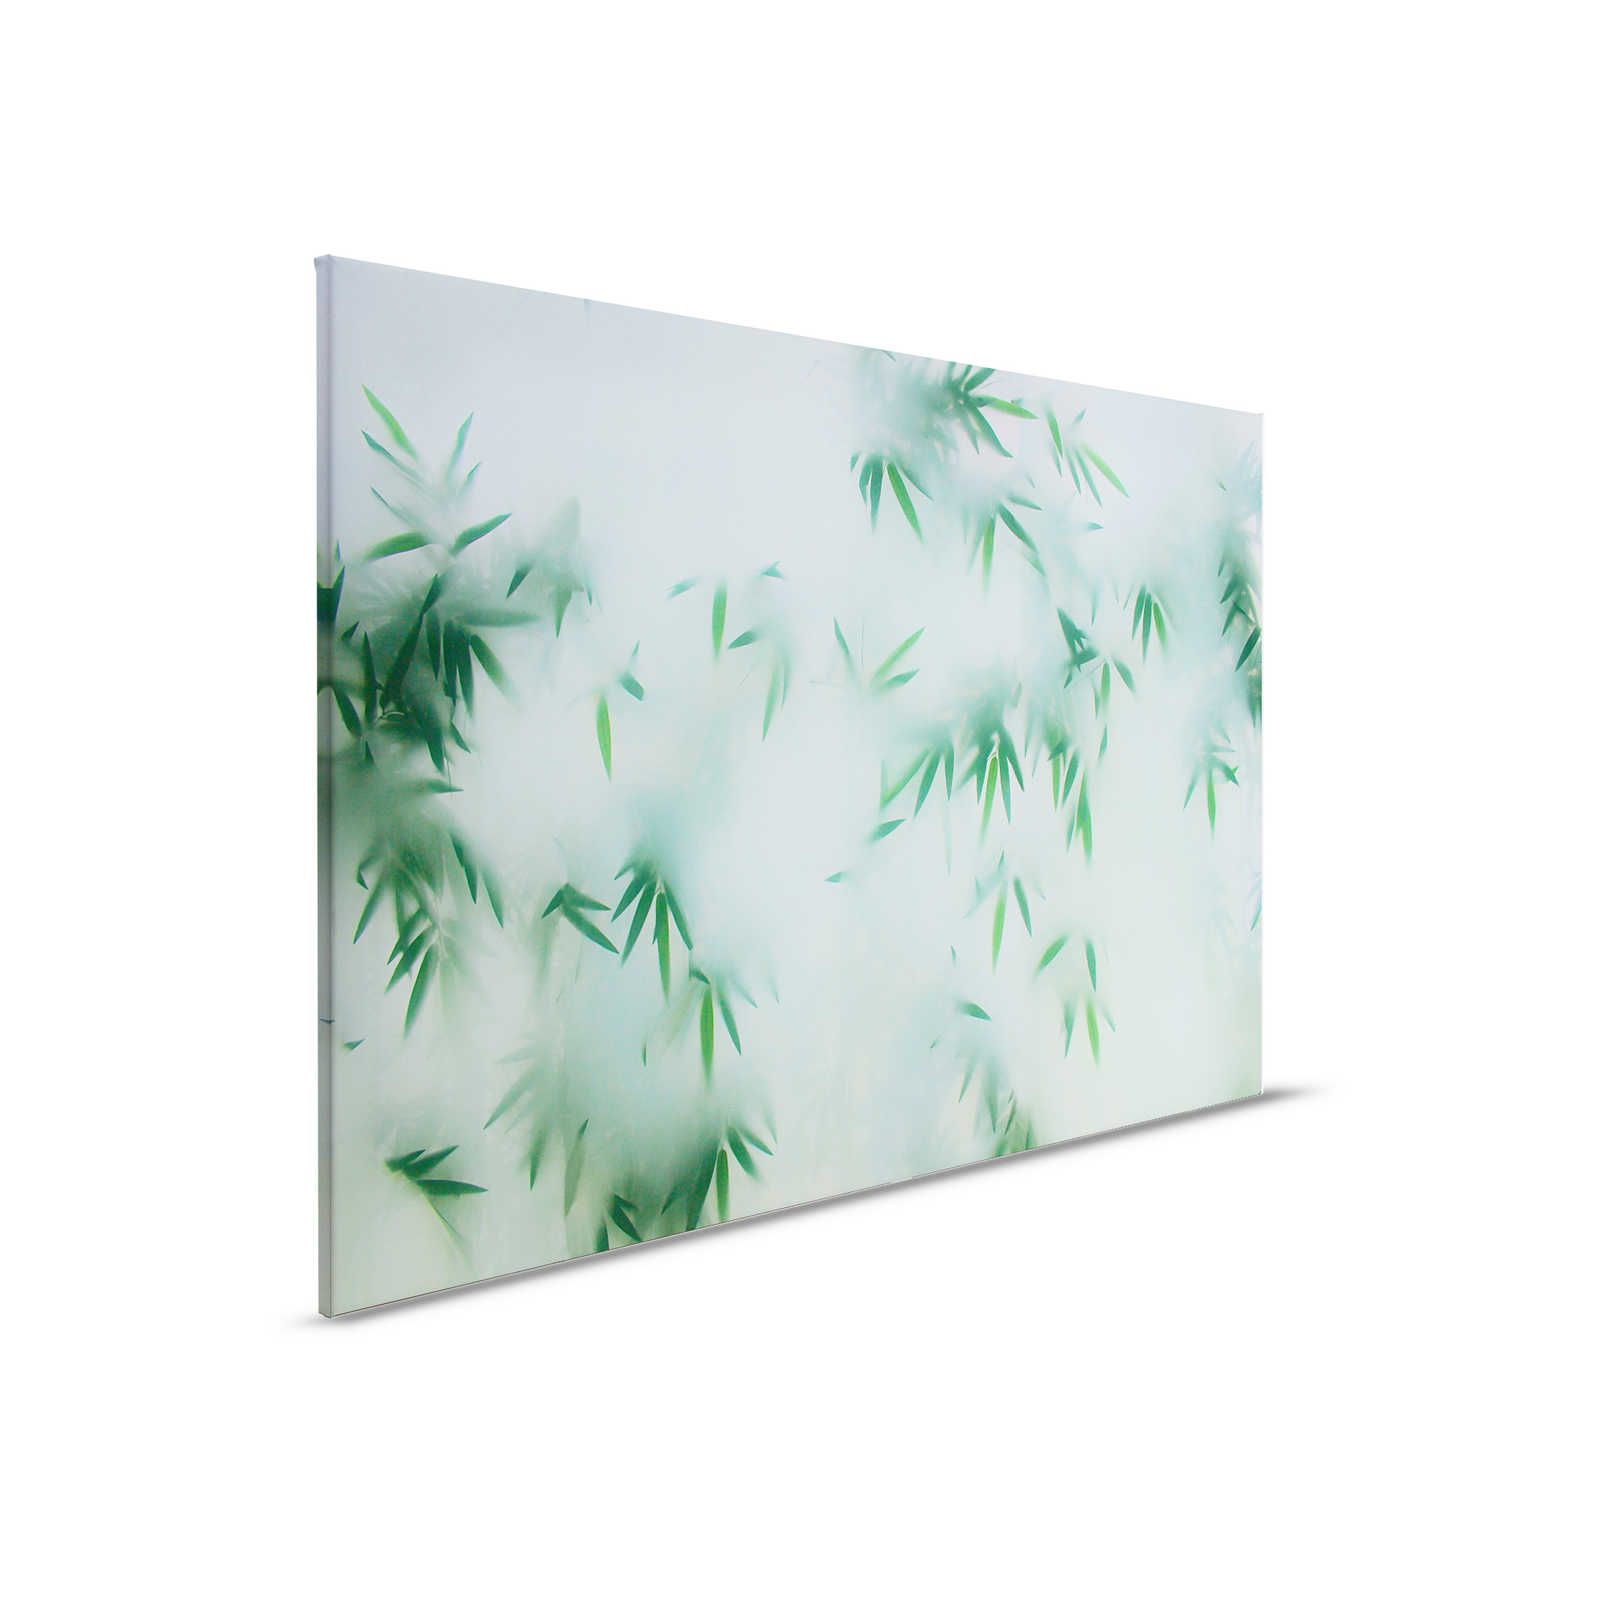         Panda Paradise 1 - Bamboo Canvas painting Green Leaves in the Mist - 0.90 m x 0.60 m
    